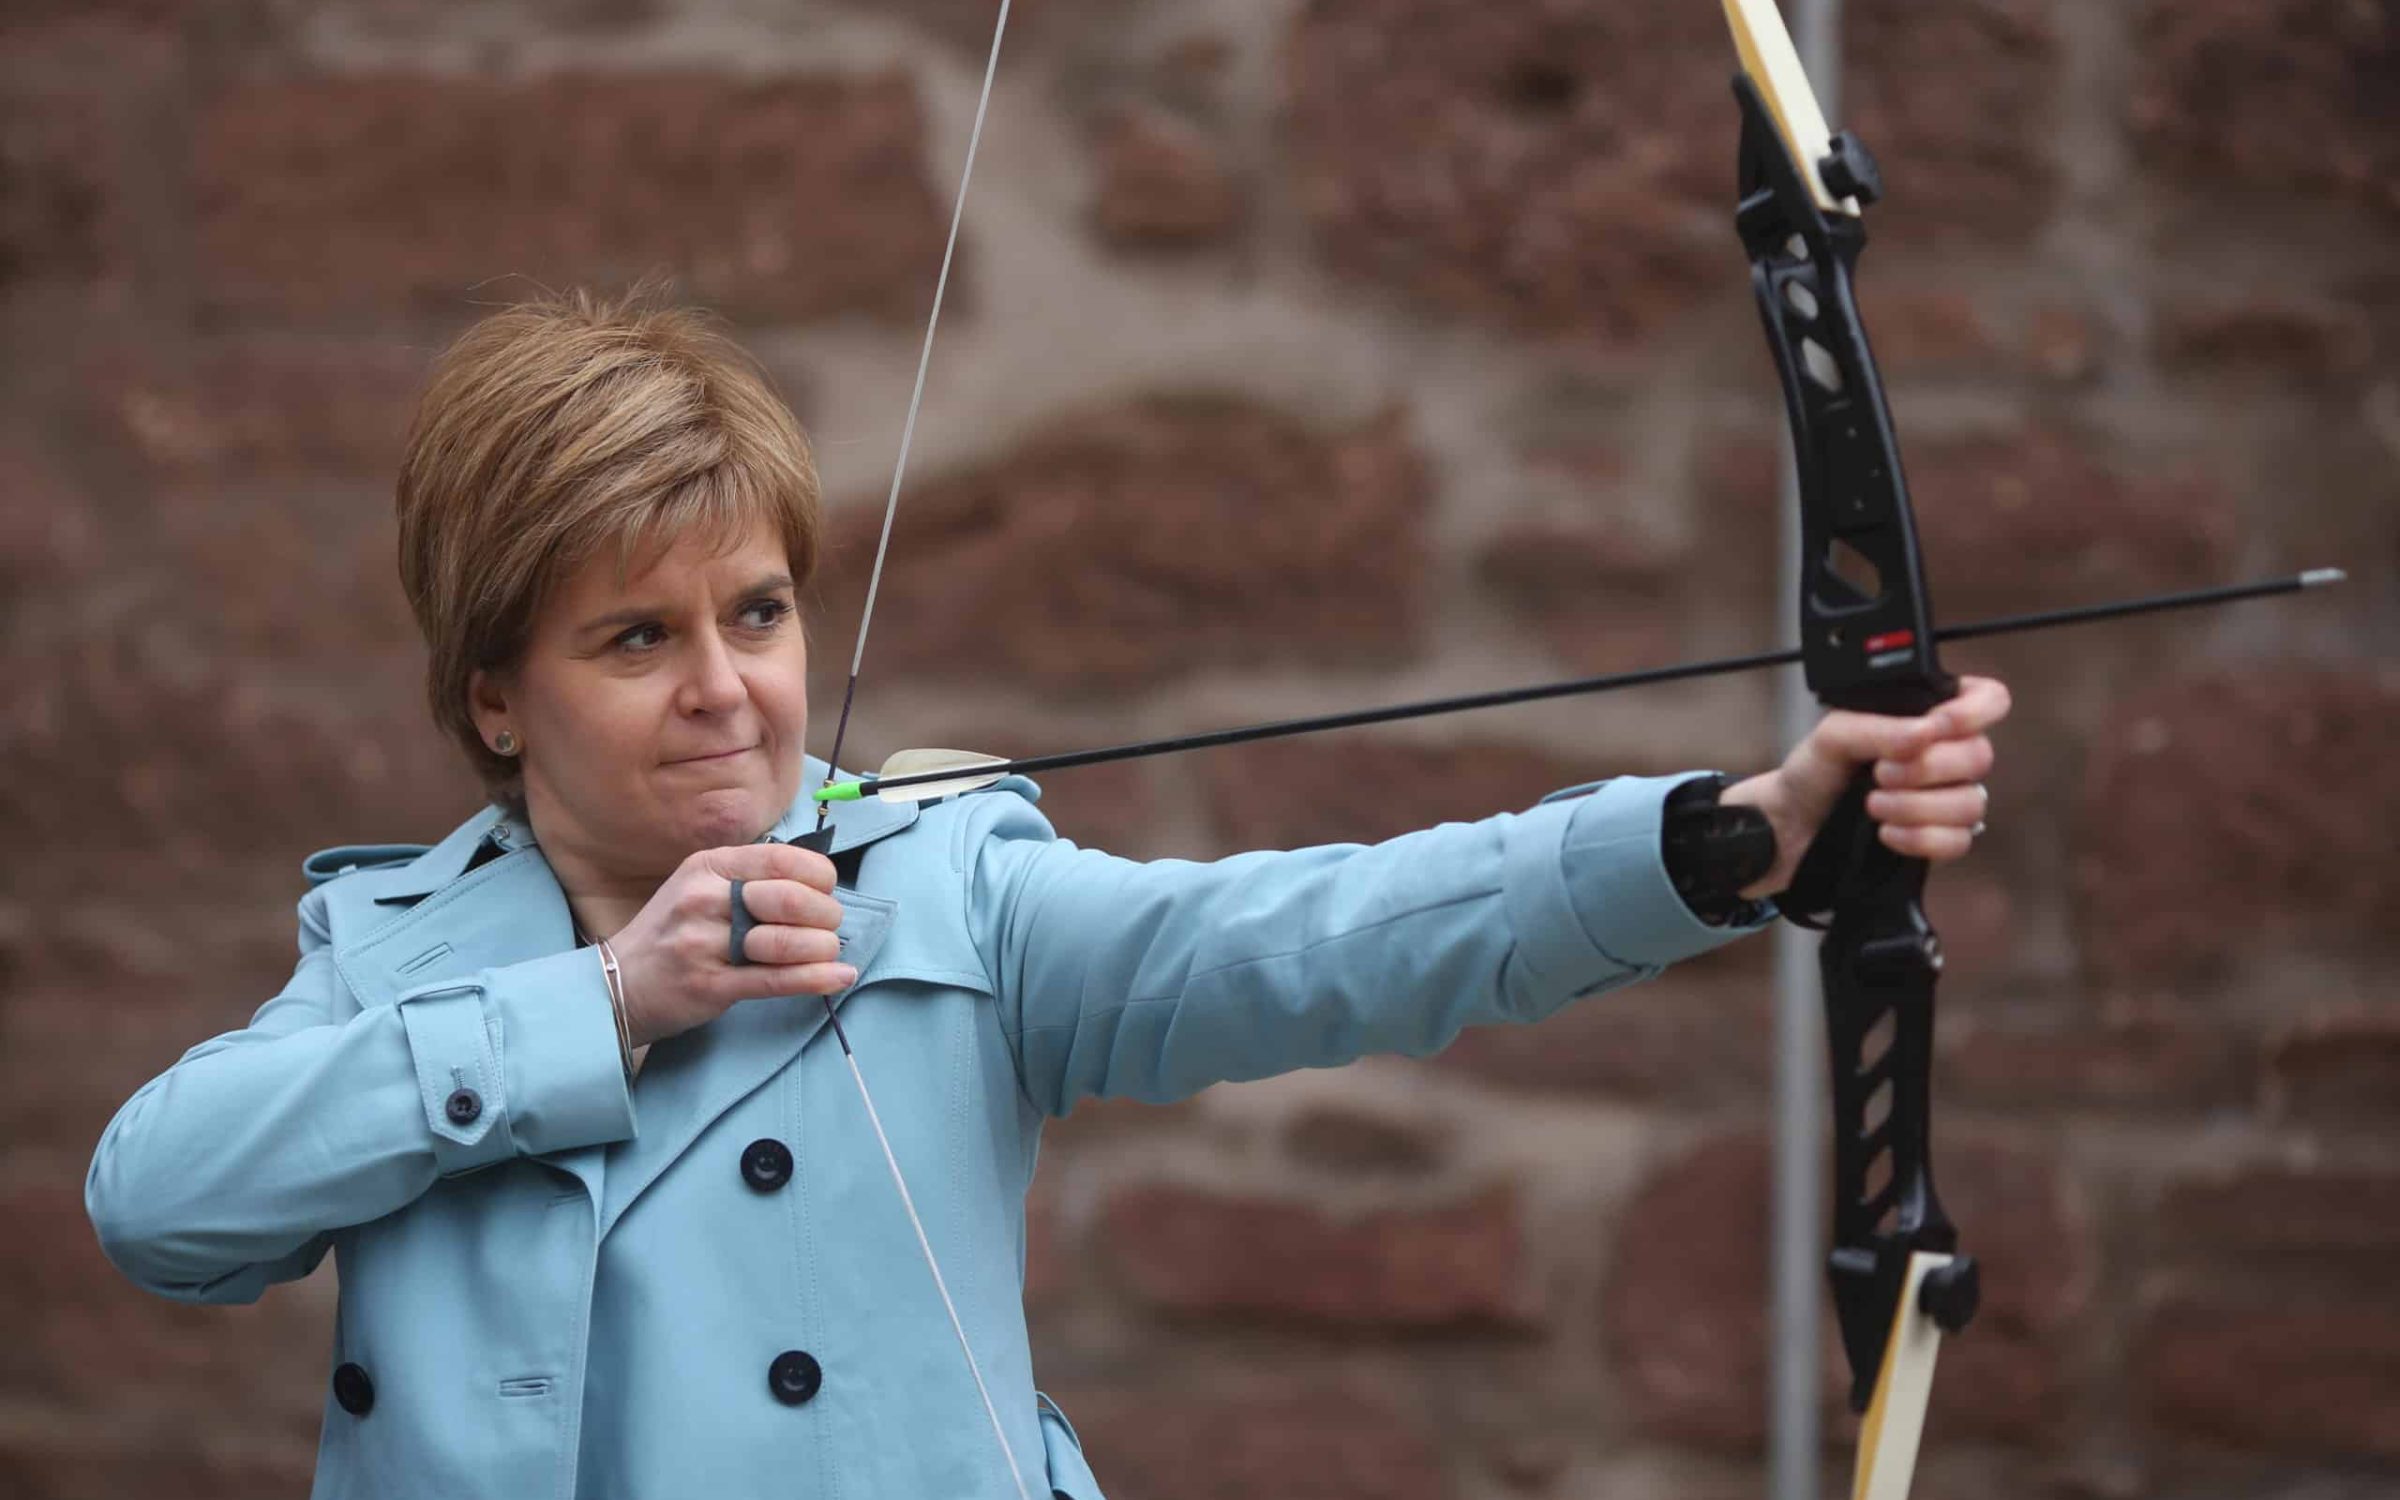 Nicola Sturgeon, First Minister of Scotland and SNP leader